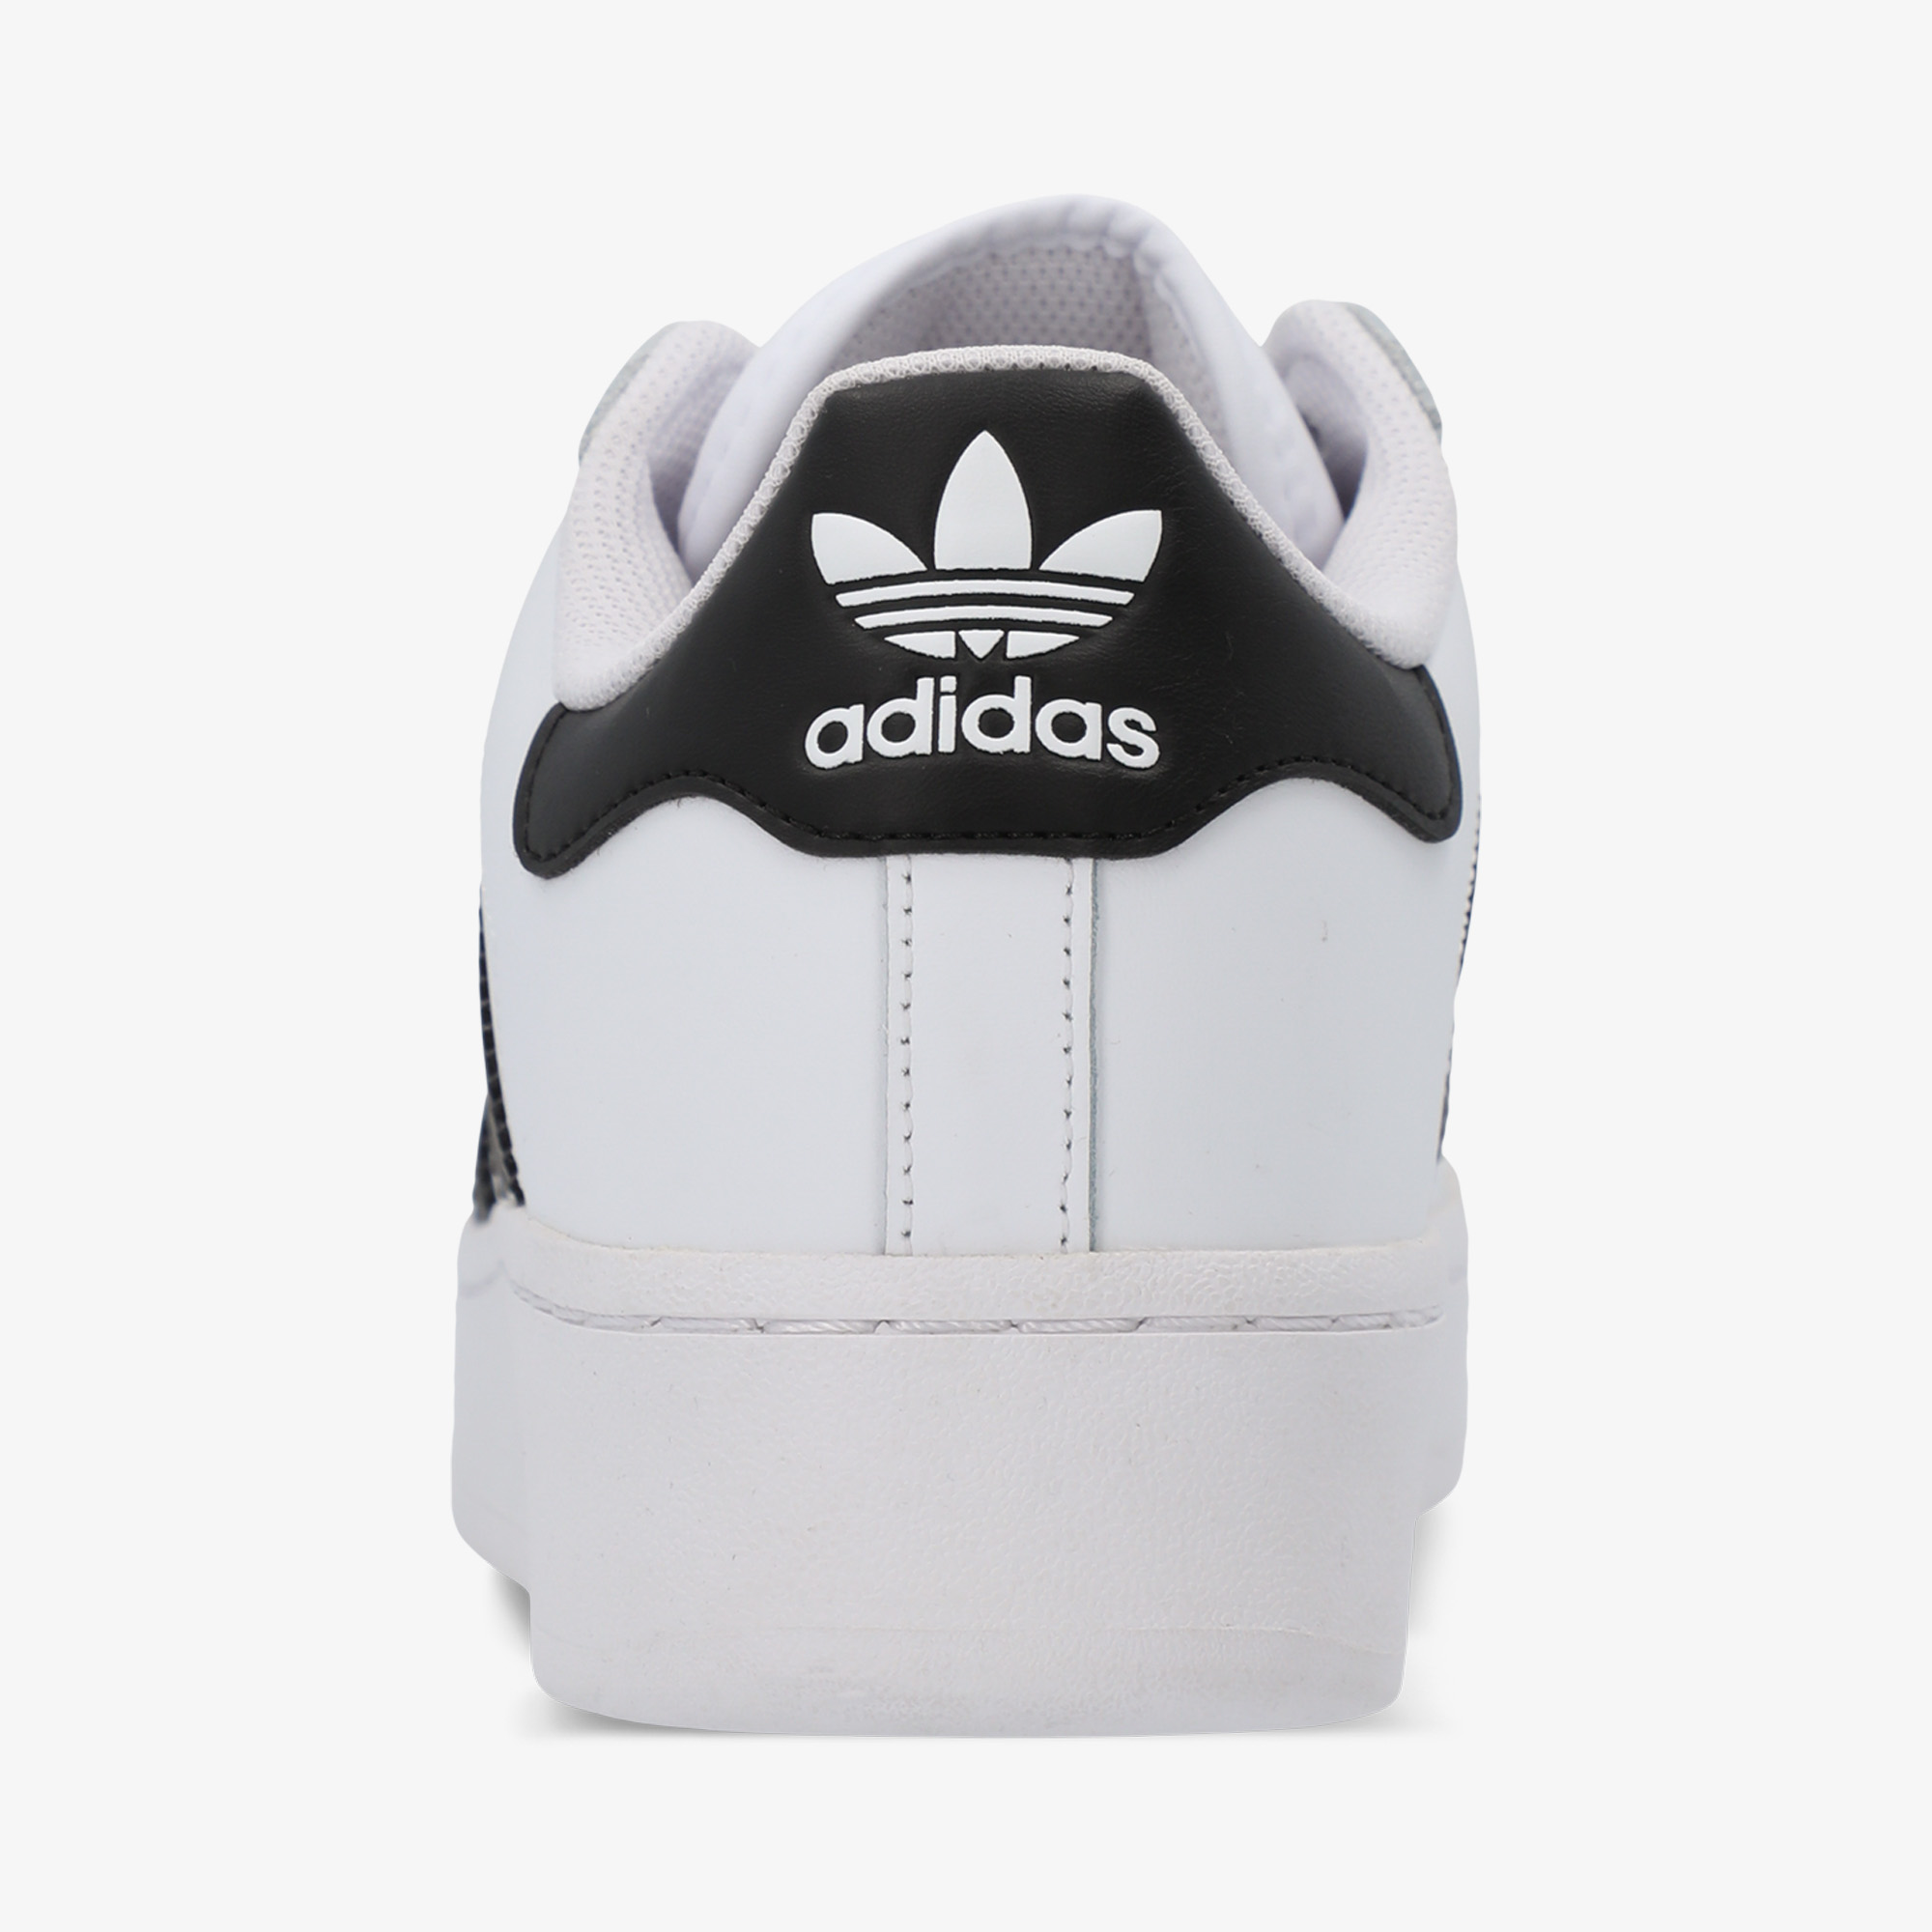 adidas Superstar Xlg, Белый IF9995A01- IF9995A01-. - фото 3